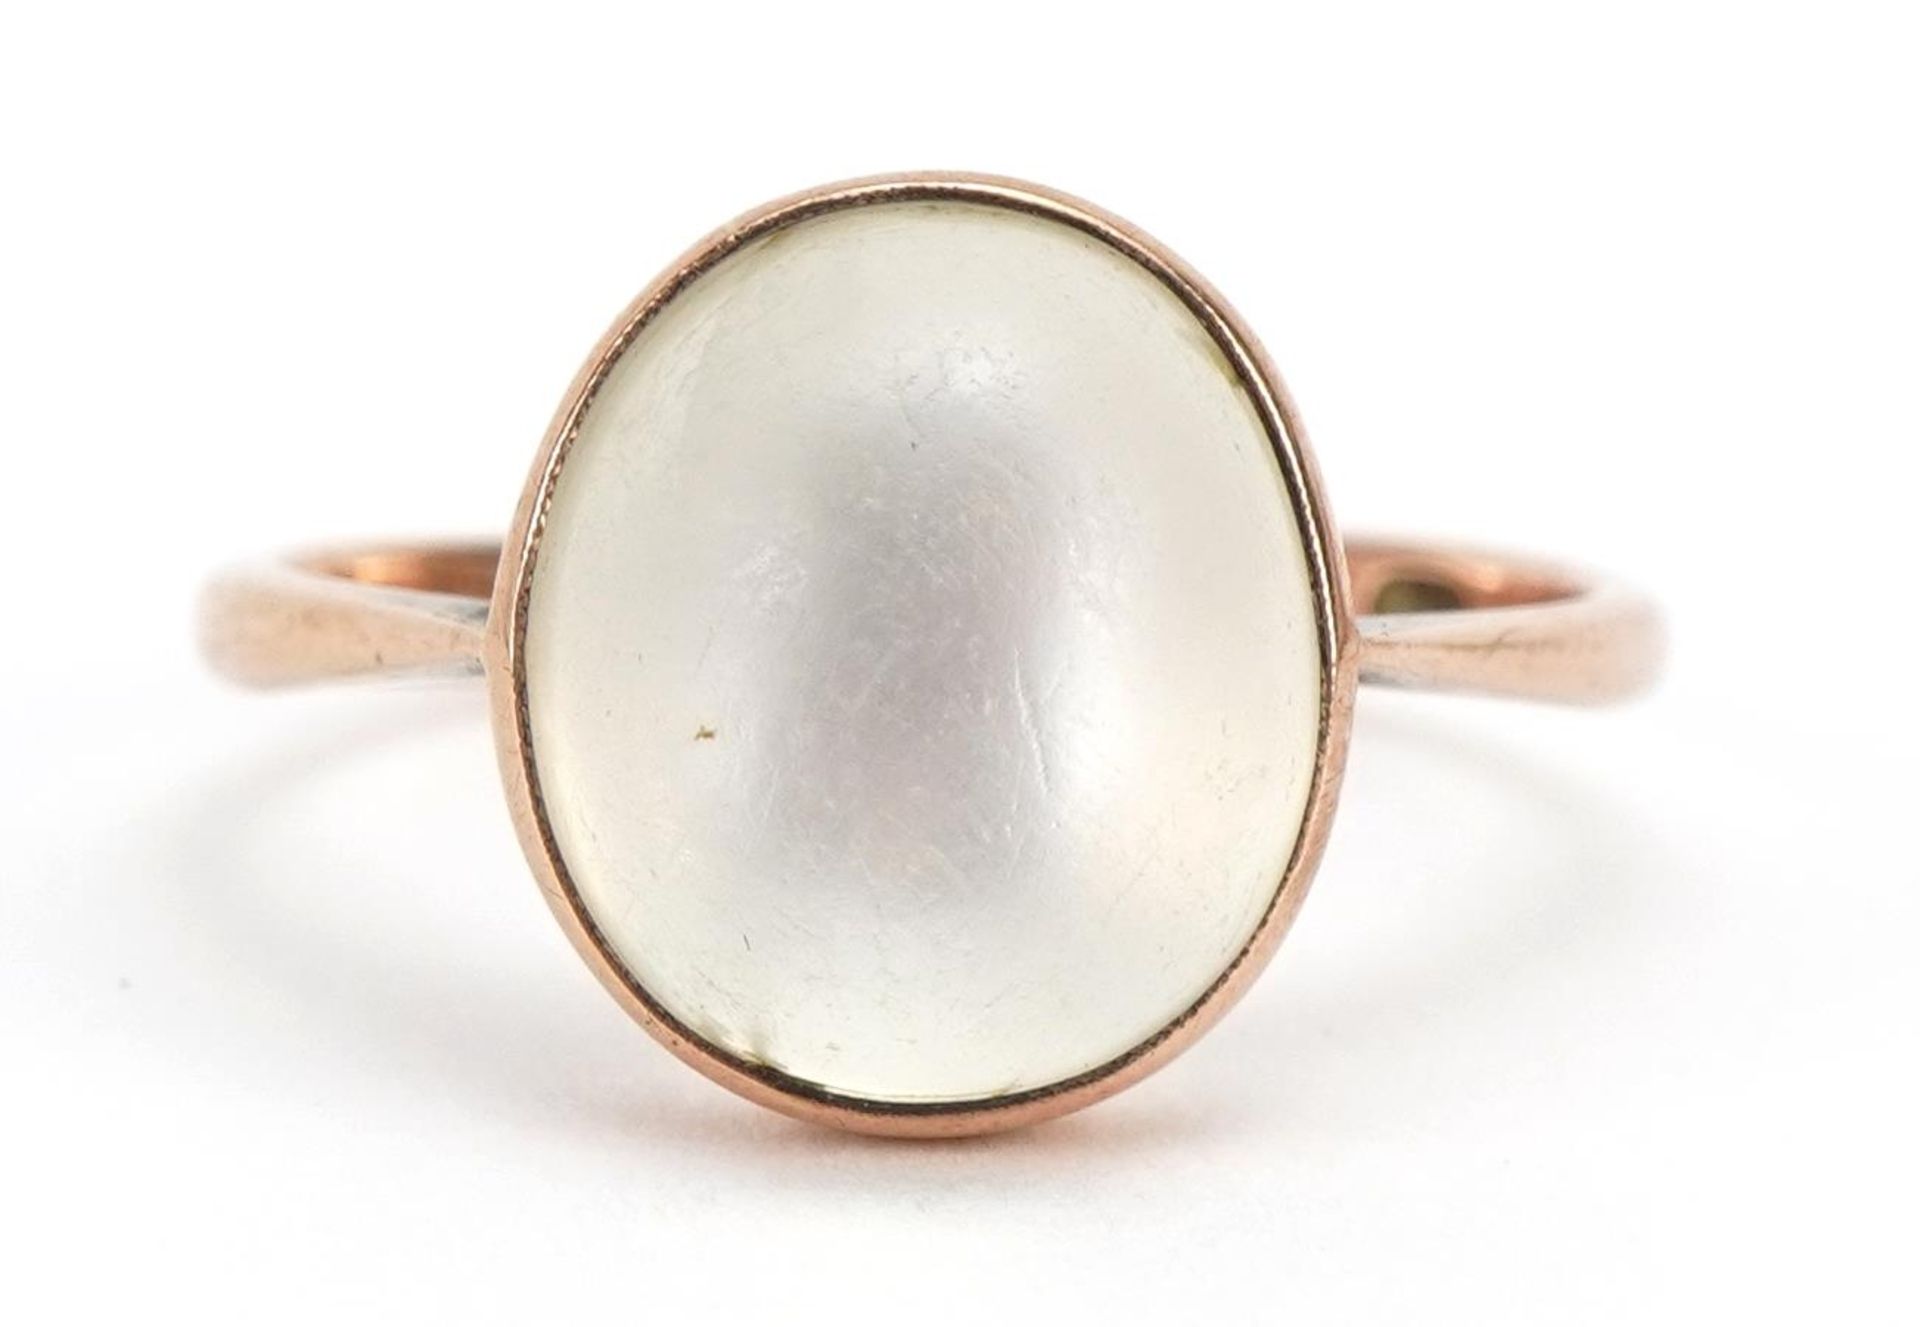 9ct rose gold cabochon moonstone ring, the stone approximately 11.4mm x 9.9mm, size P, 2.7g